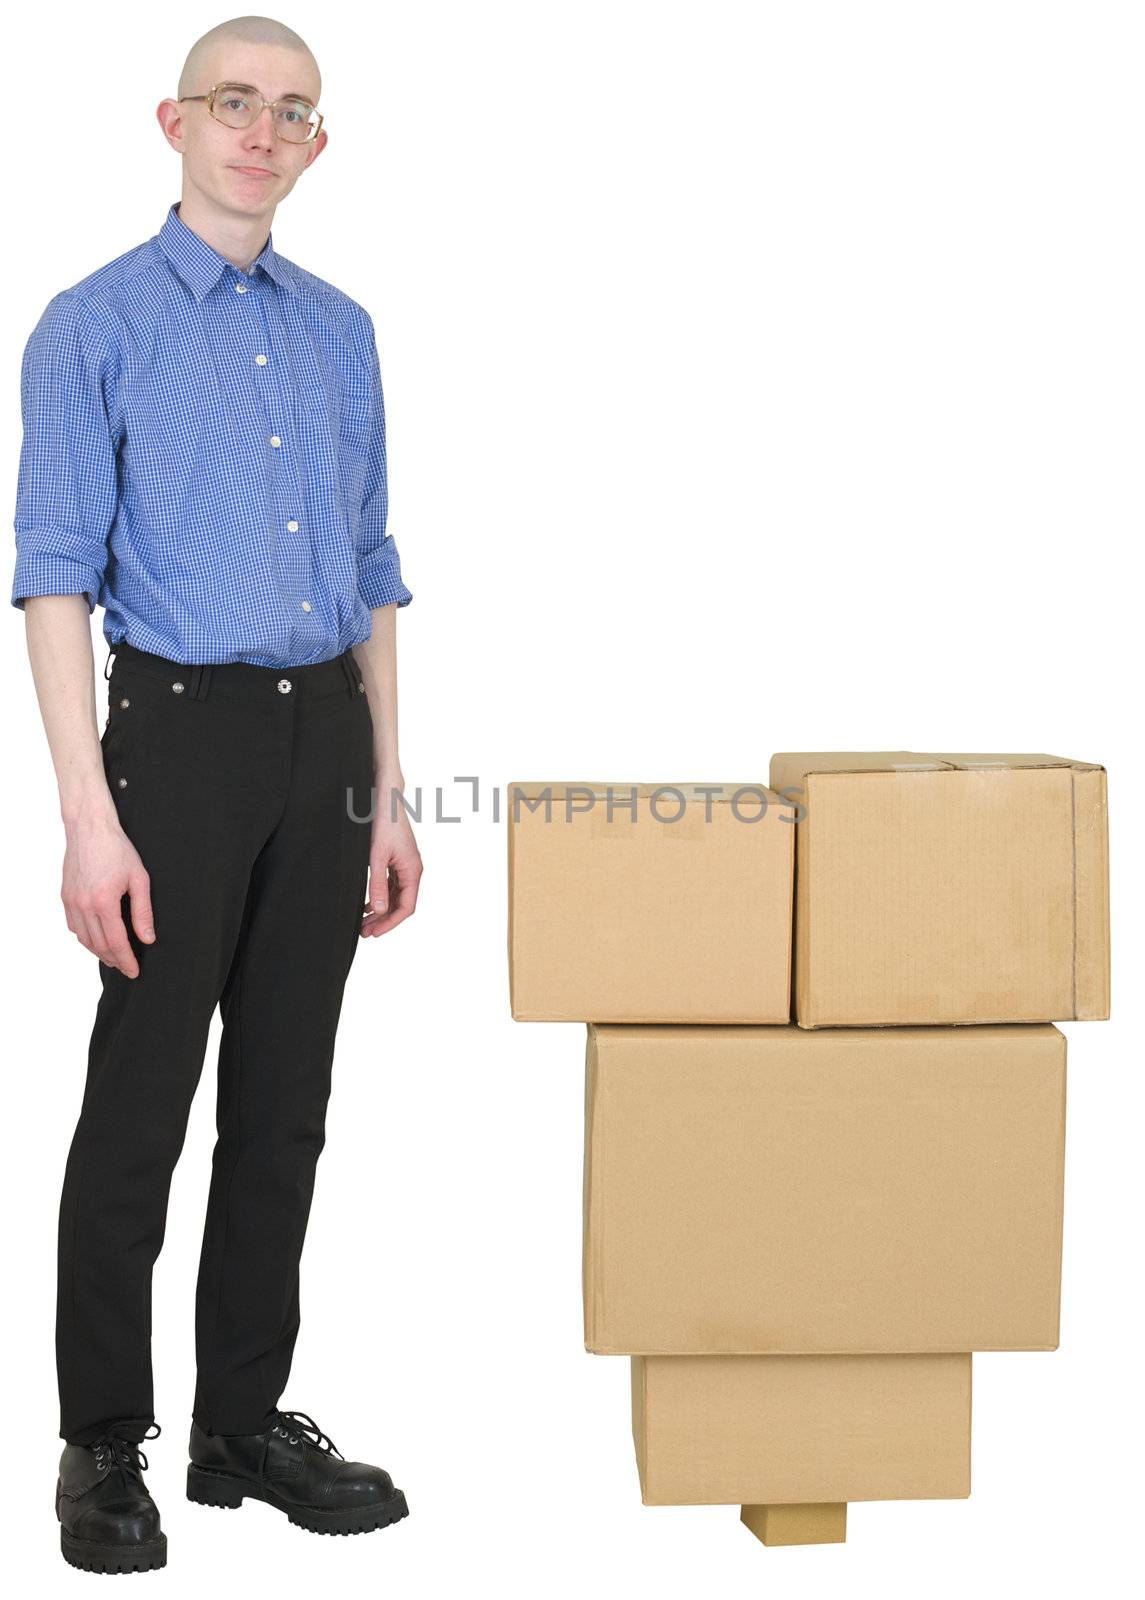 Courier in spectacles and cardboard boxes on white